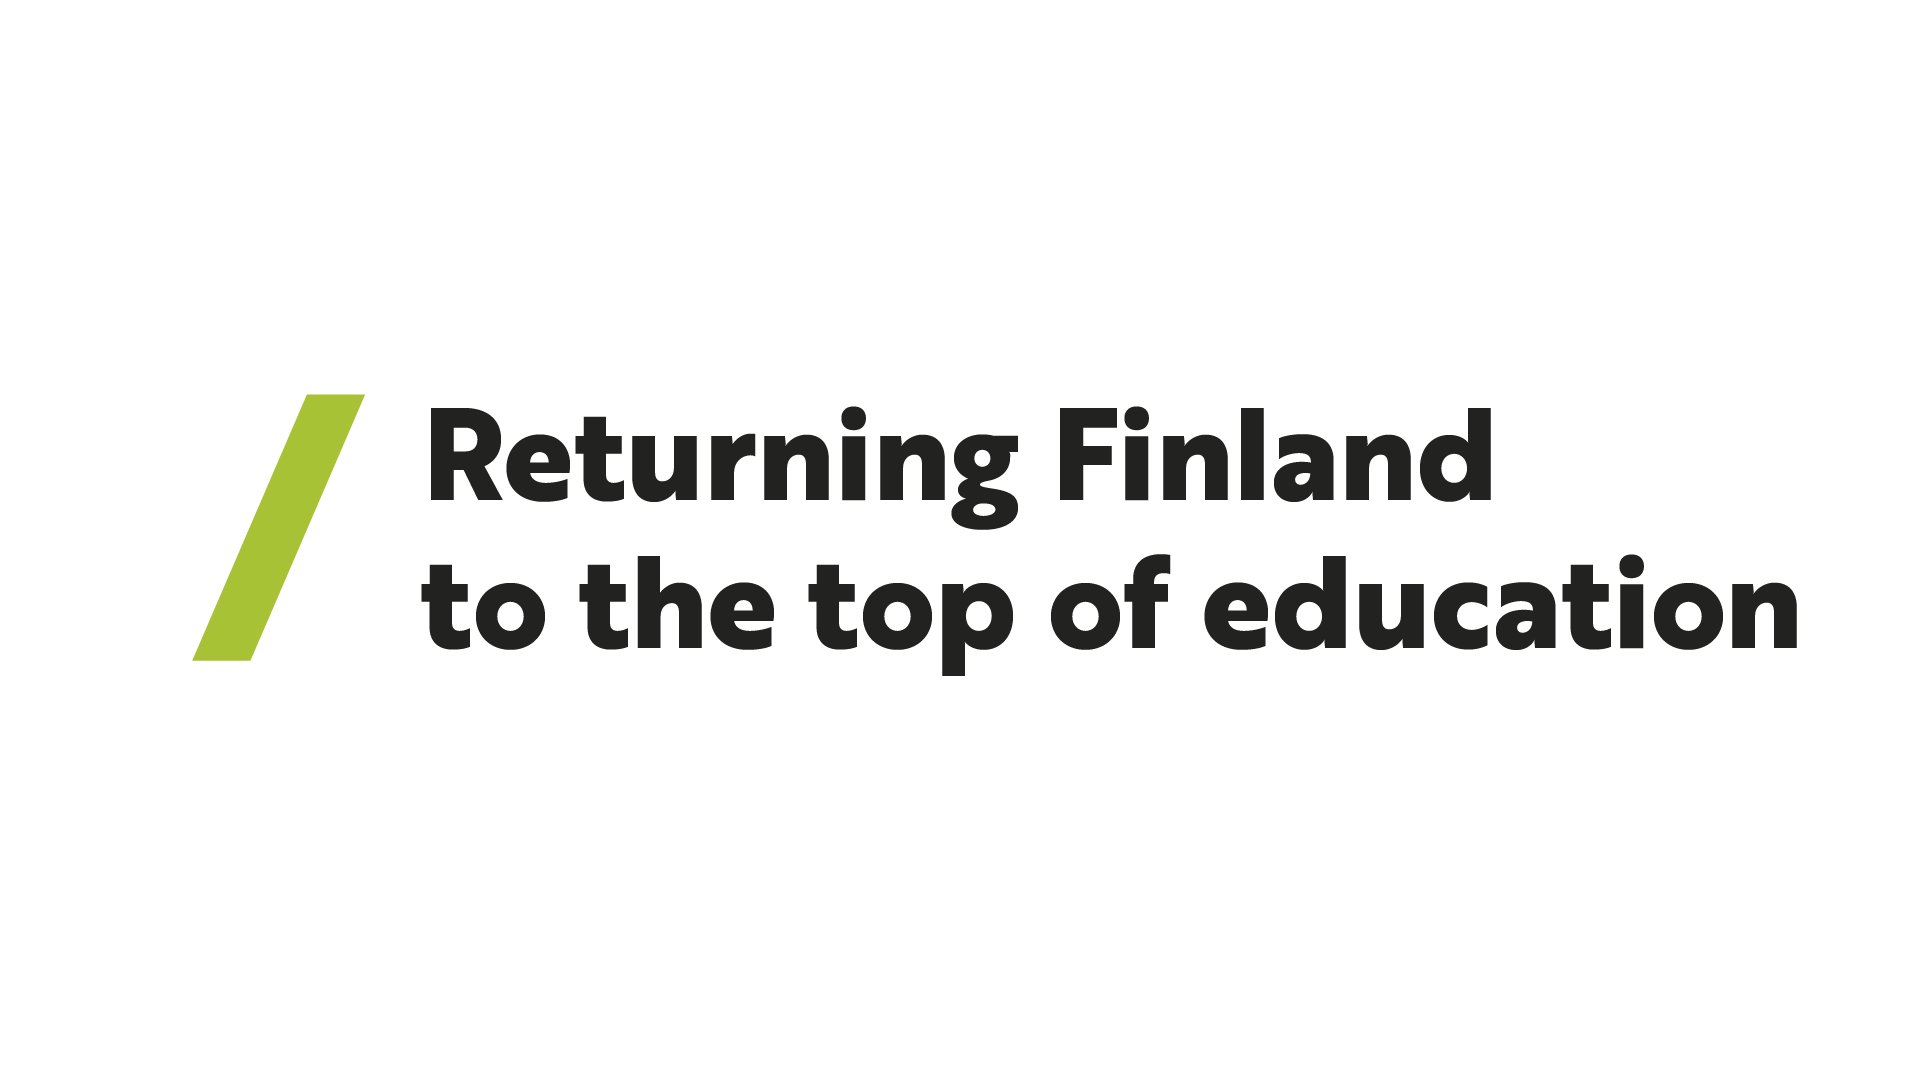 Text: Returning Finland to the top of education.